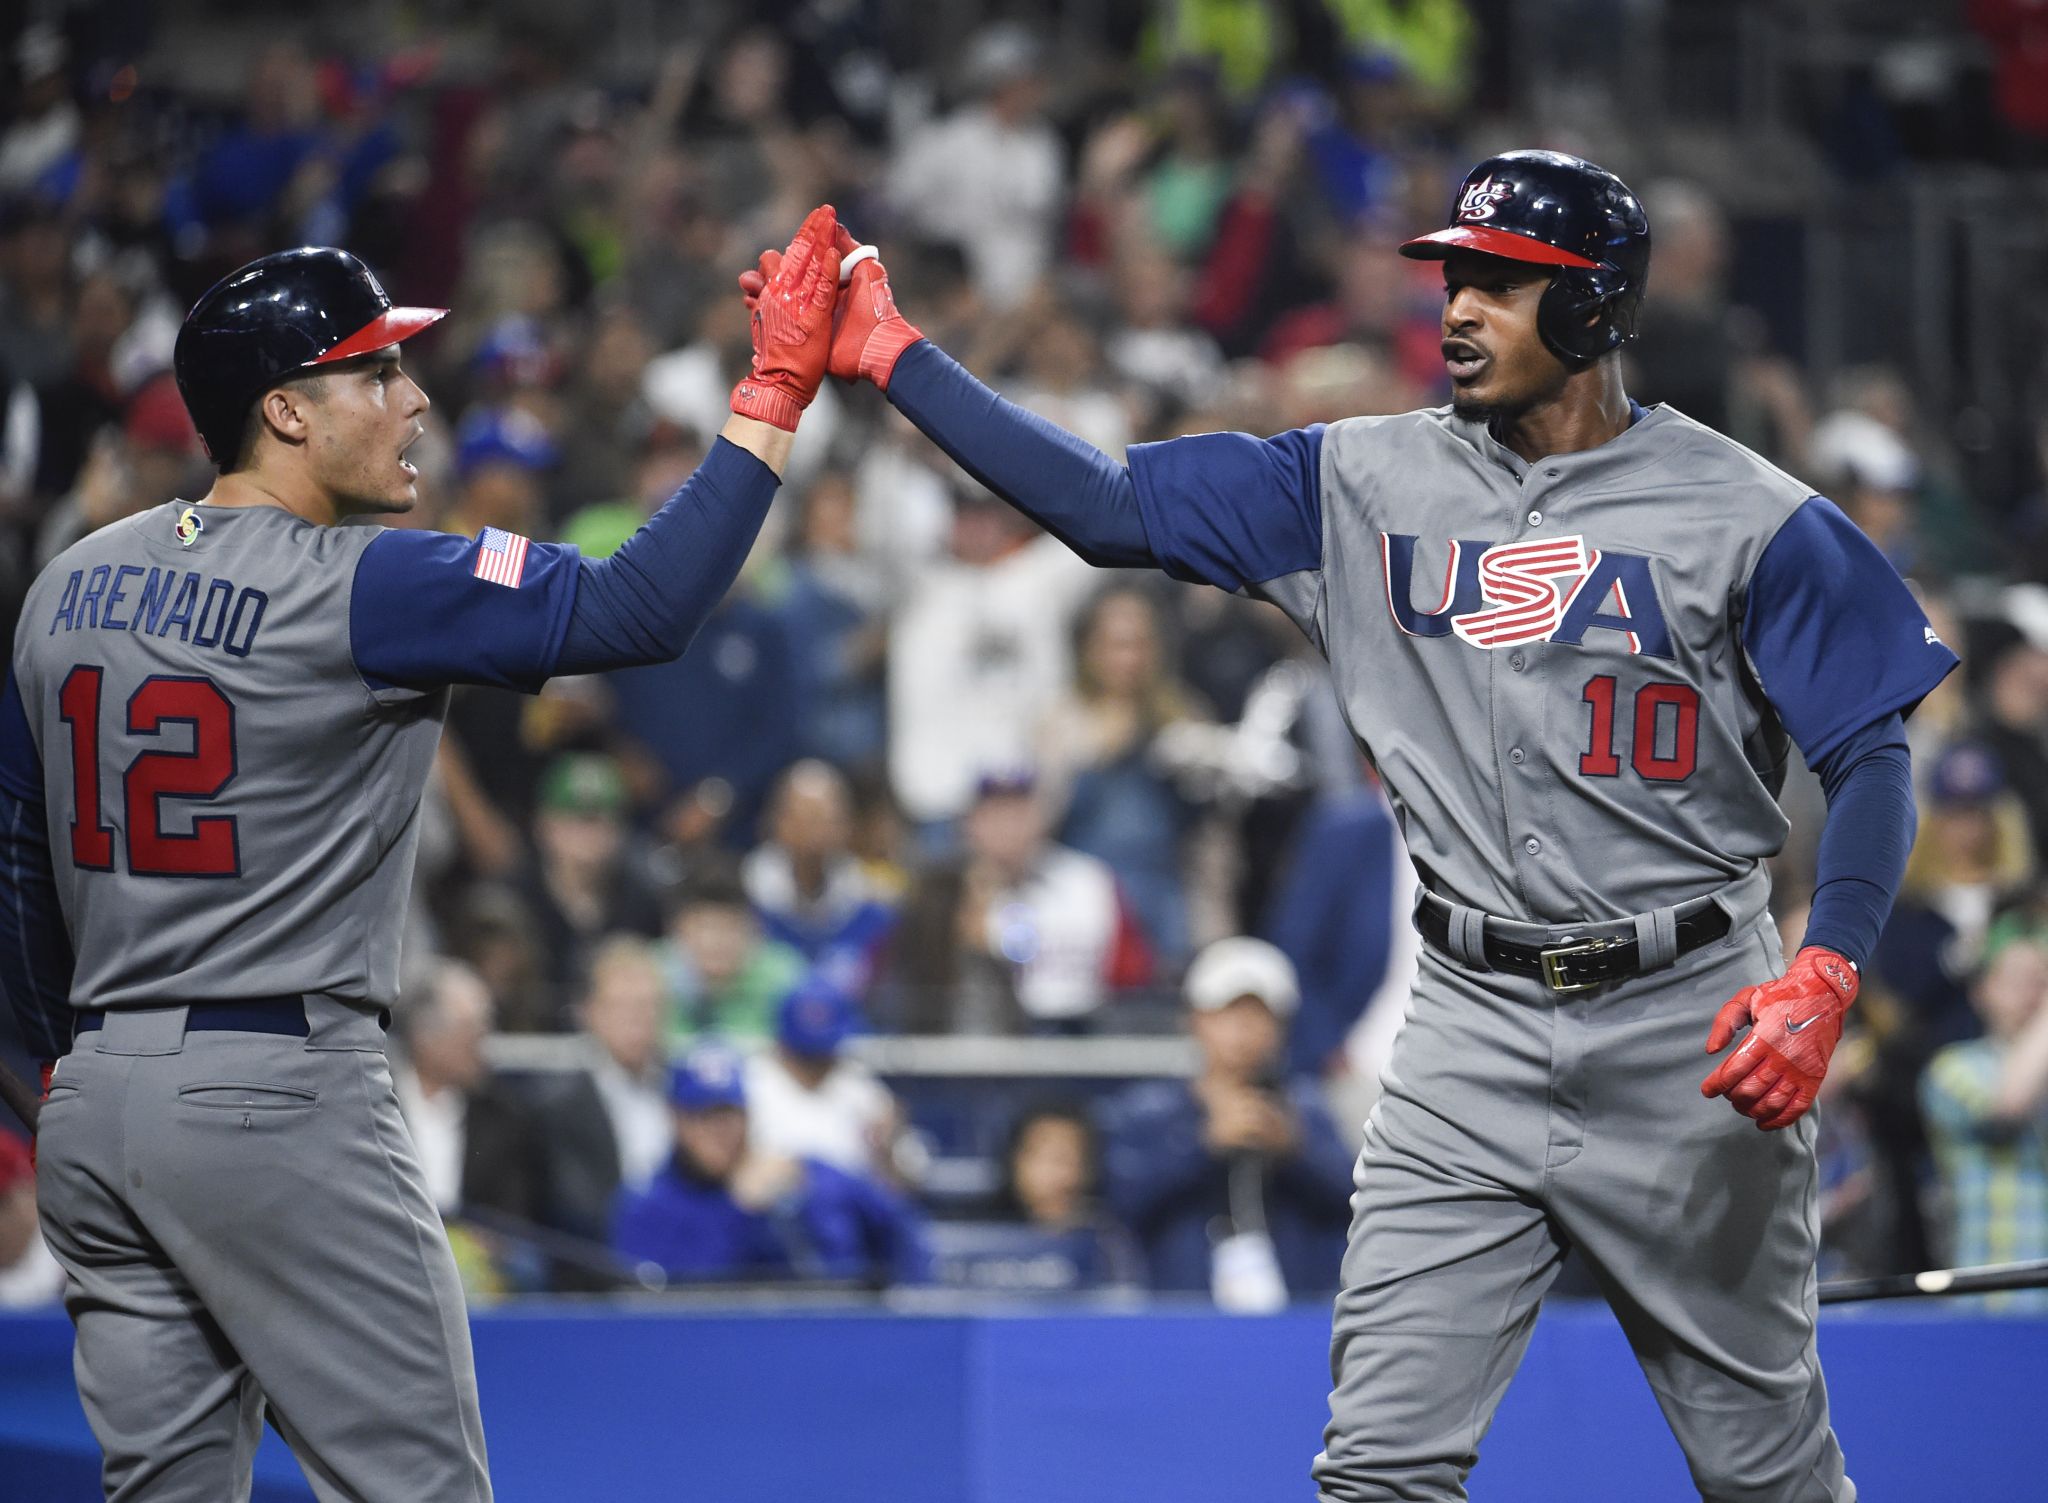 SAN DIEGO, CA - MARCH 17: Puerto Rico Second baseman Javier Baez gets high  fives after their 6-5 win over the USA in World Baseball Classic second  round Pool F game against